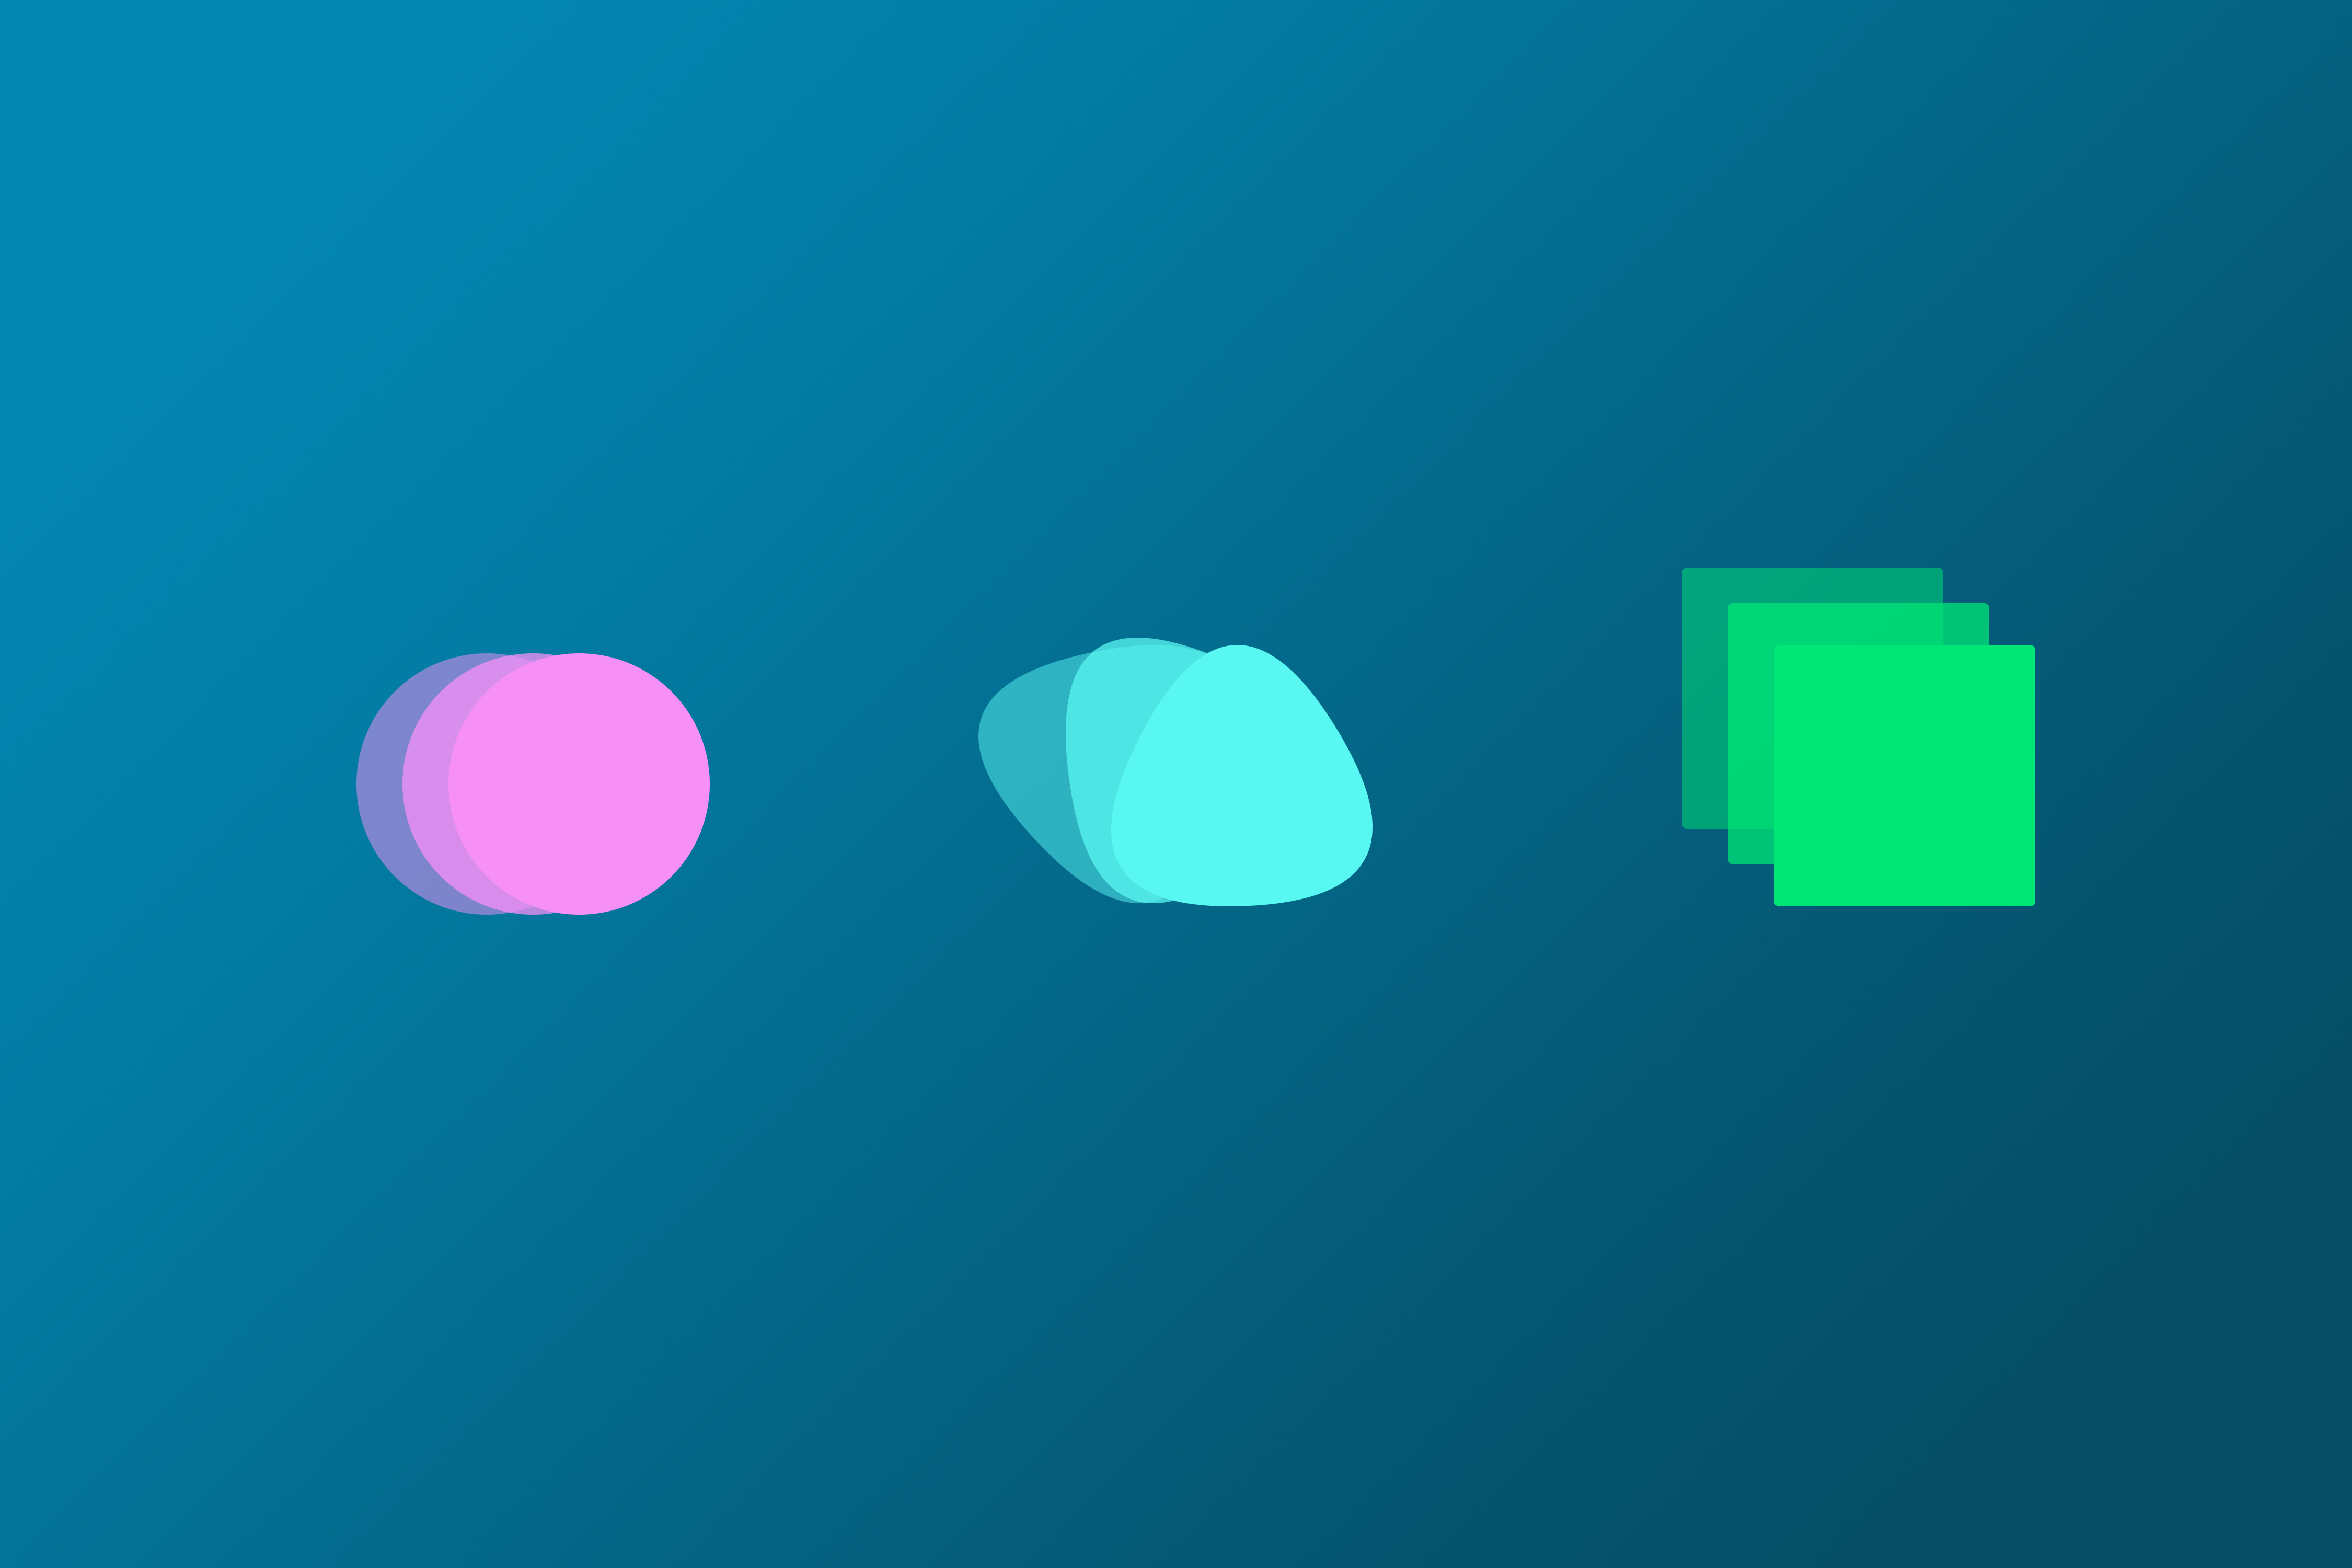 CSS Transforms Transitions Animations
Circle Triangle Square